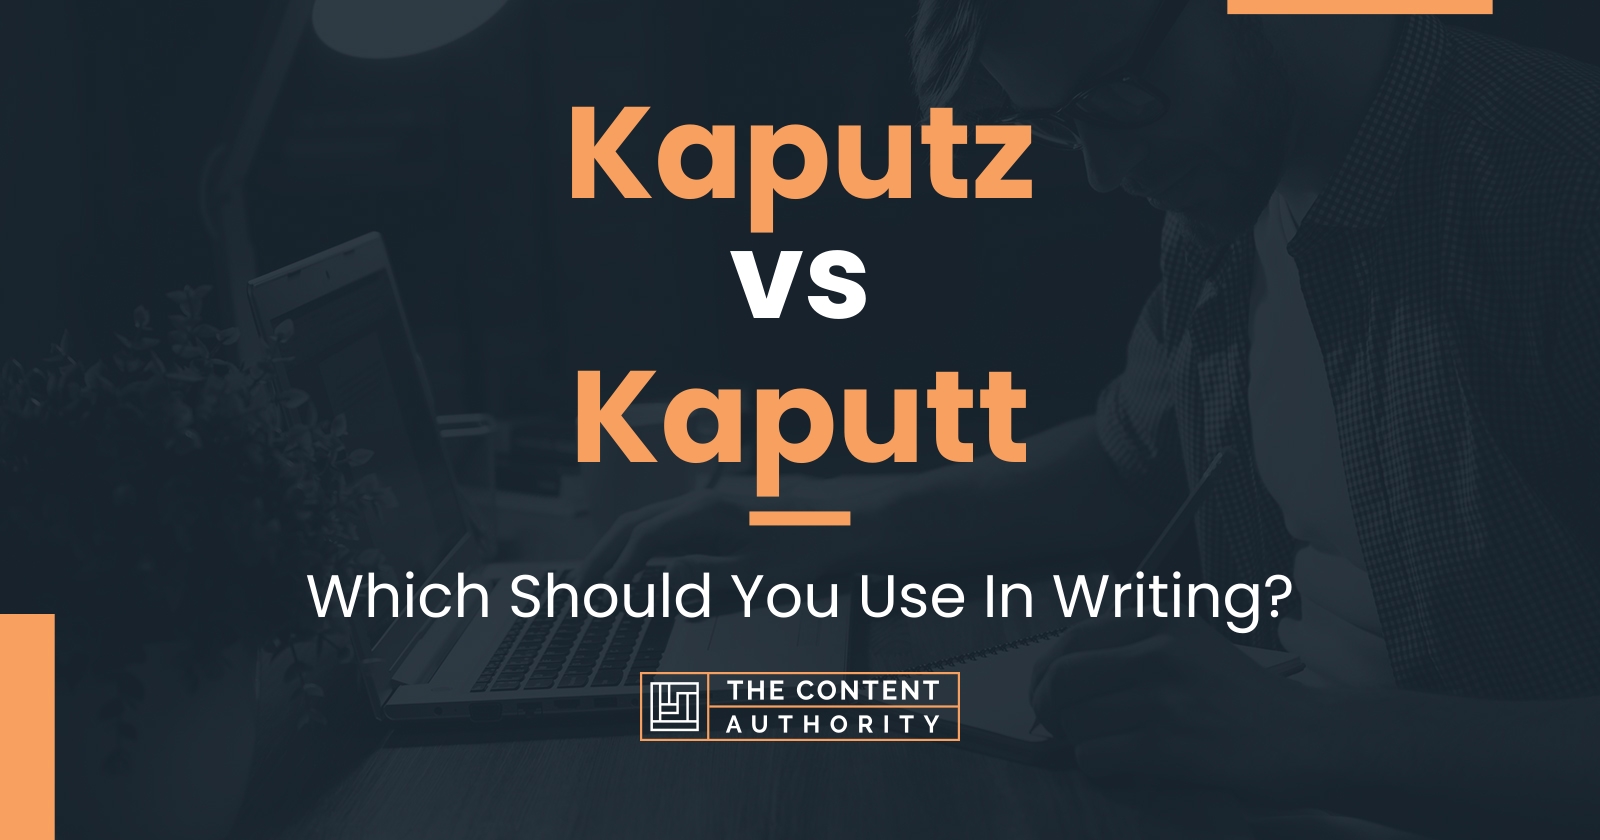 Kaputz vs Kaputt: Which Should You Use In Writing?